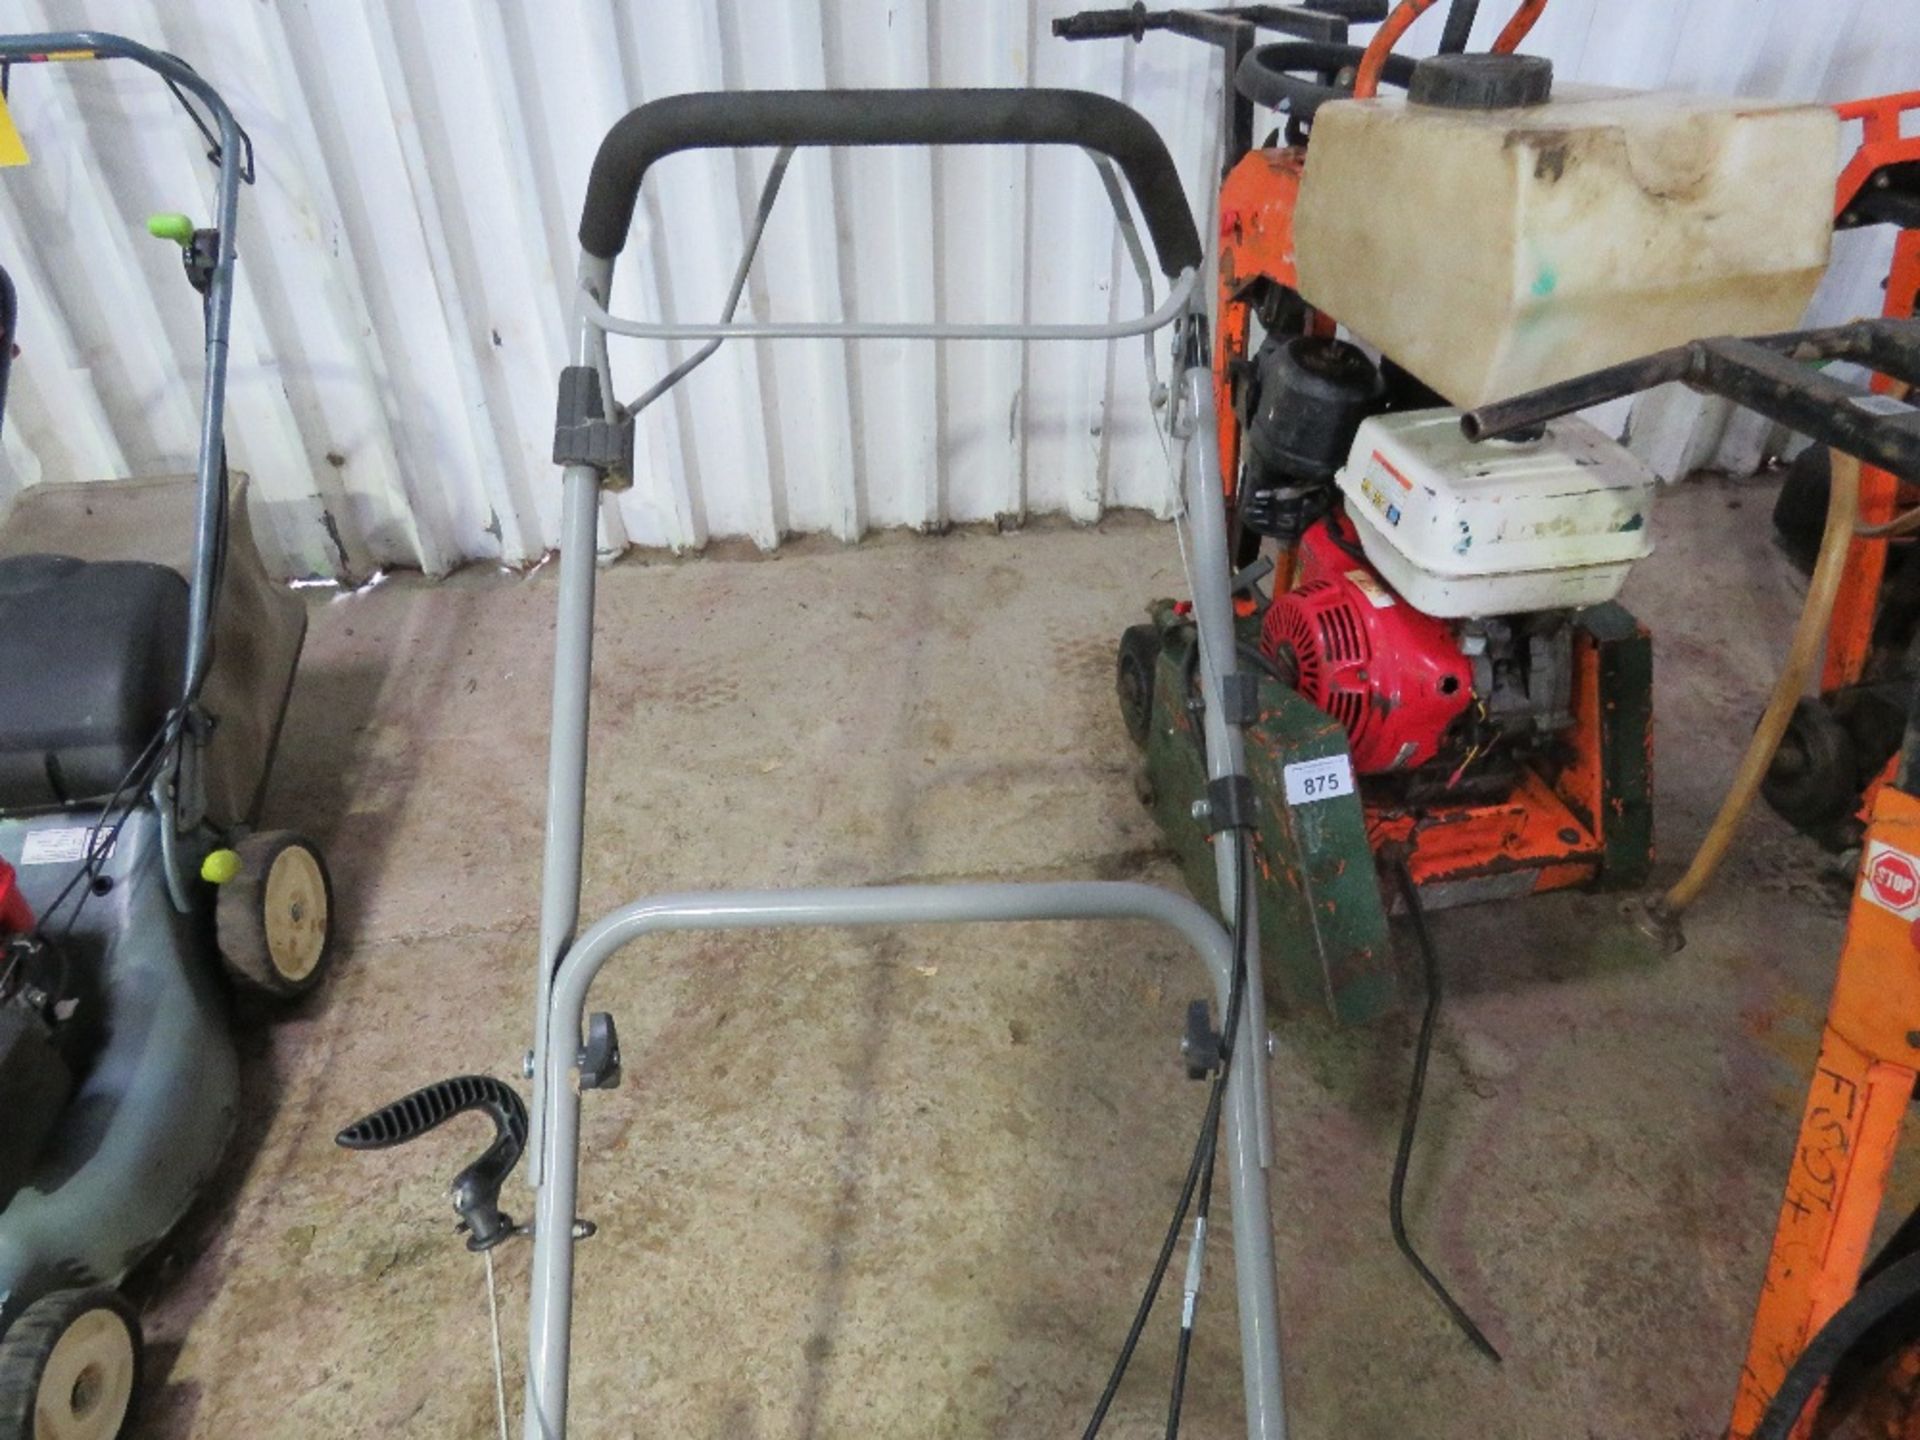 HYUNDAI PETROL ENGINED LAWN MOWER, NO COLLECTOR. THIS LOT IS SOLD UNDER THE AUCTIONEERS MARGIN SC - Image 3 of 3